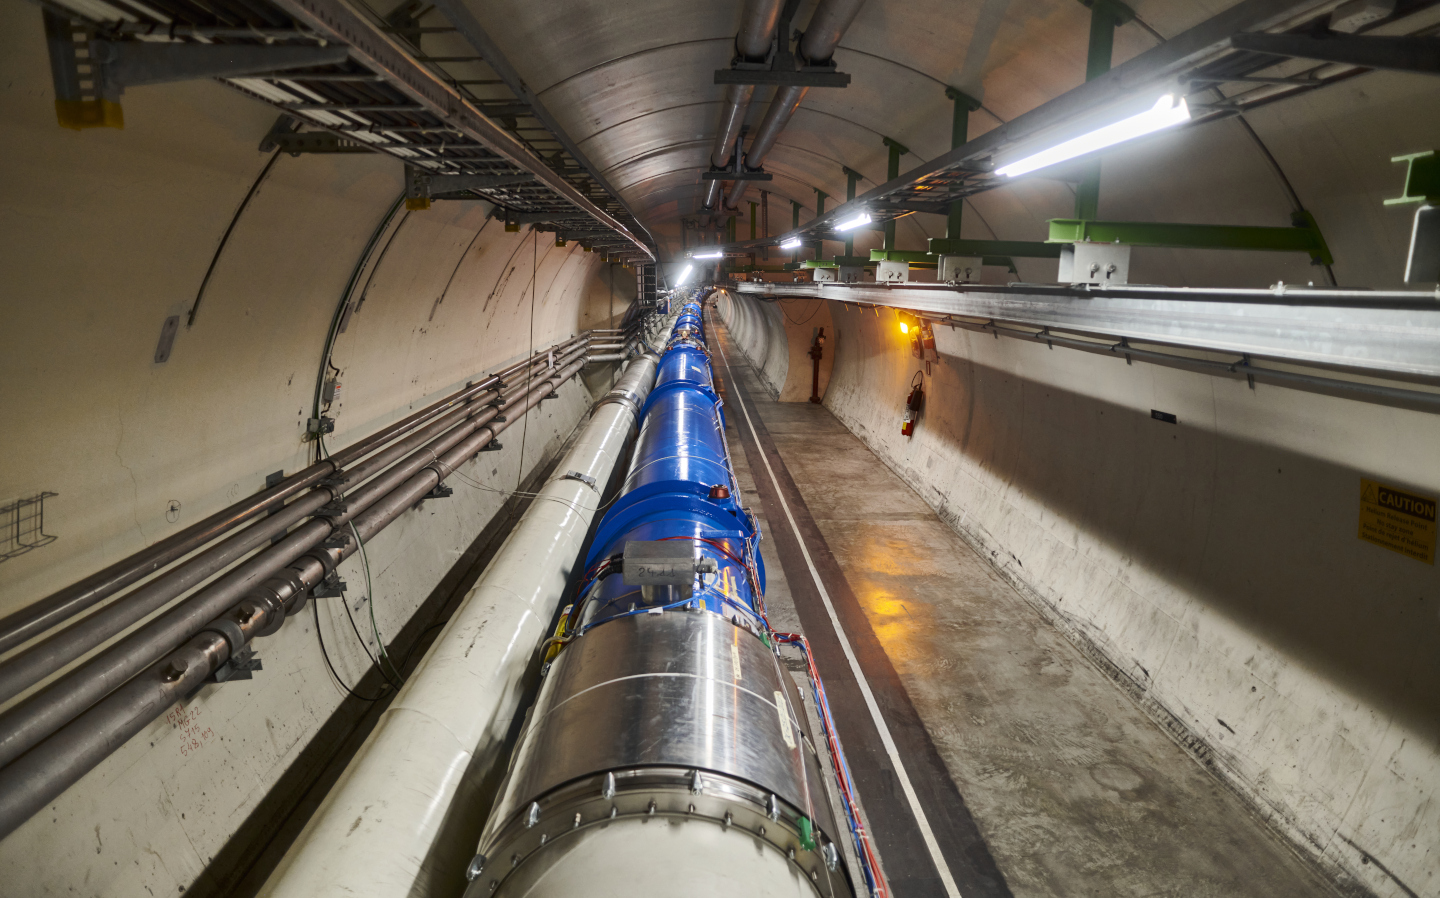 LHC dipole magnets in the tunnel